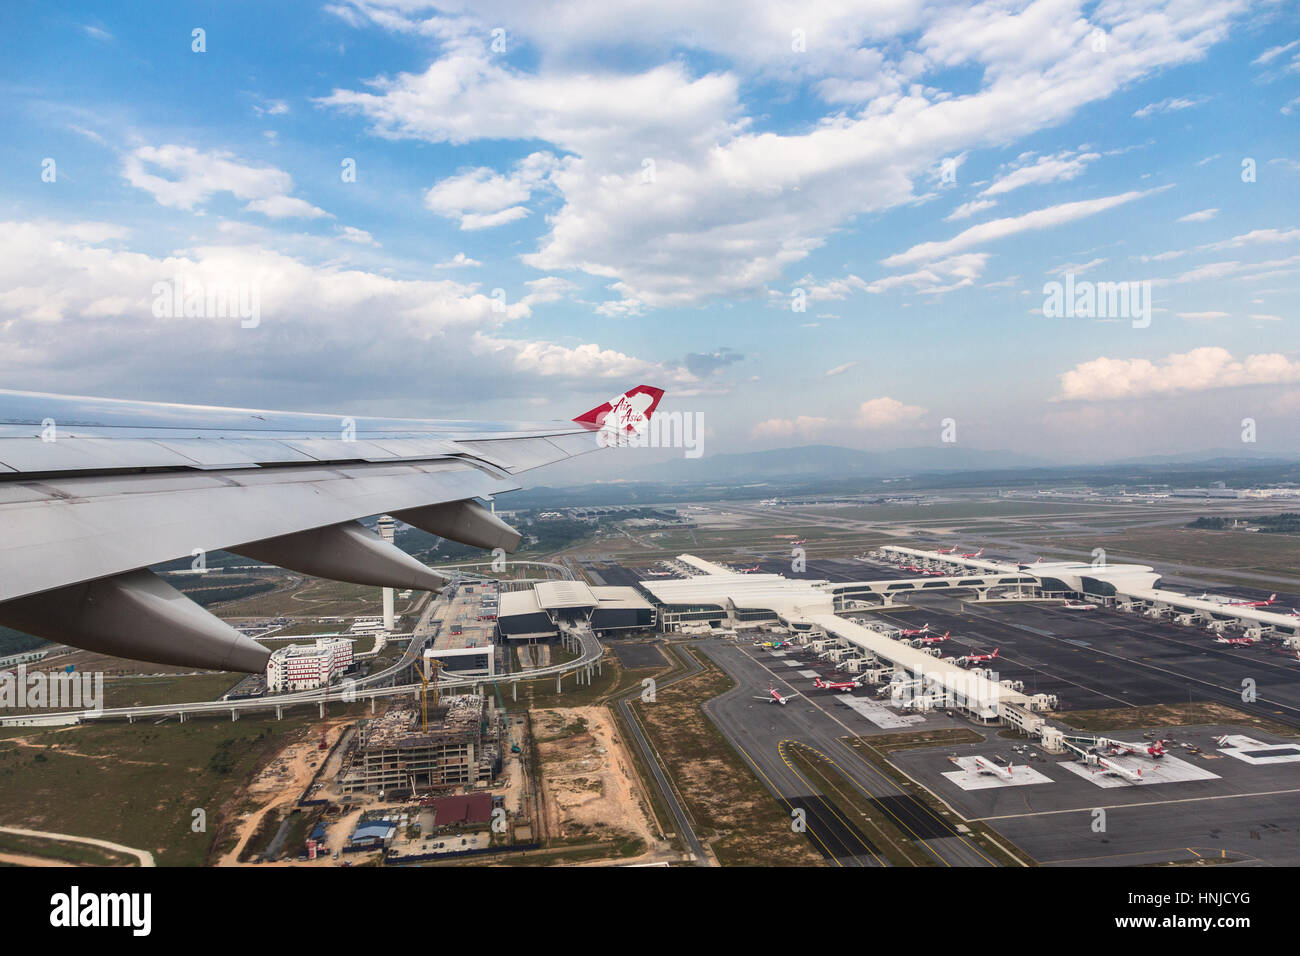 KUALA LUMPUR, MALAYSIA - MARCH 1 2016: An Air Asia X plane takes off from KLIA2 airport in Kuala Lumpur. This is a major low cost carrier in Asia. Stock Photo